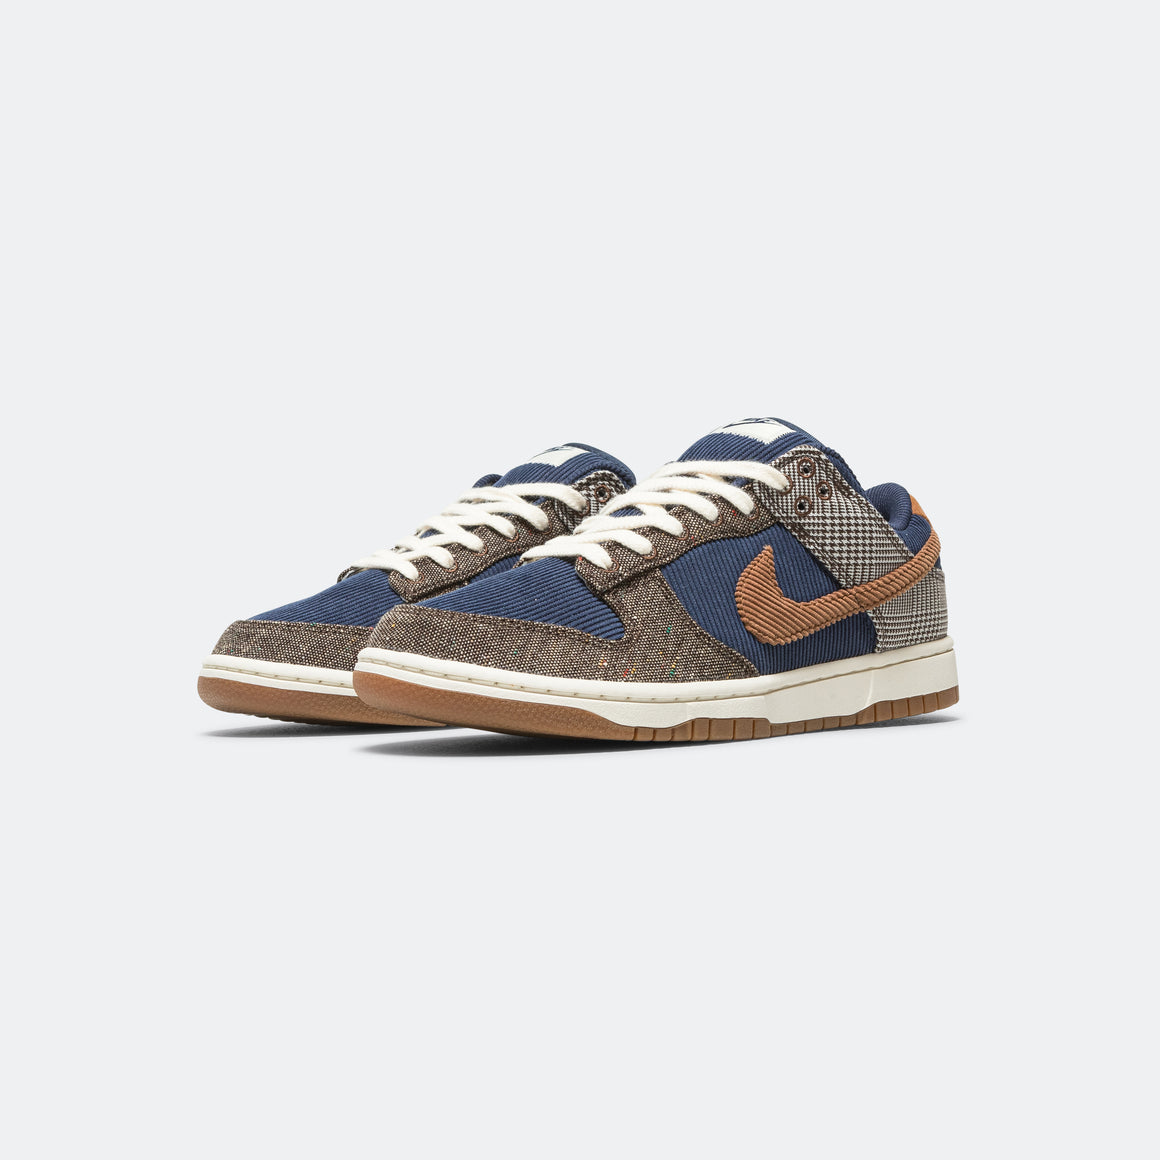 Nike - Dunk Low PRM - Midnight Navy/Ale Brown-Pale Ivory - UP THERE